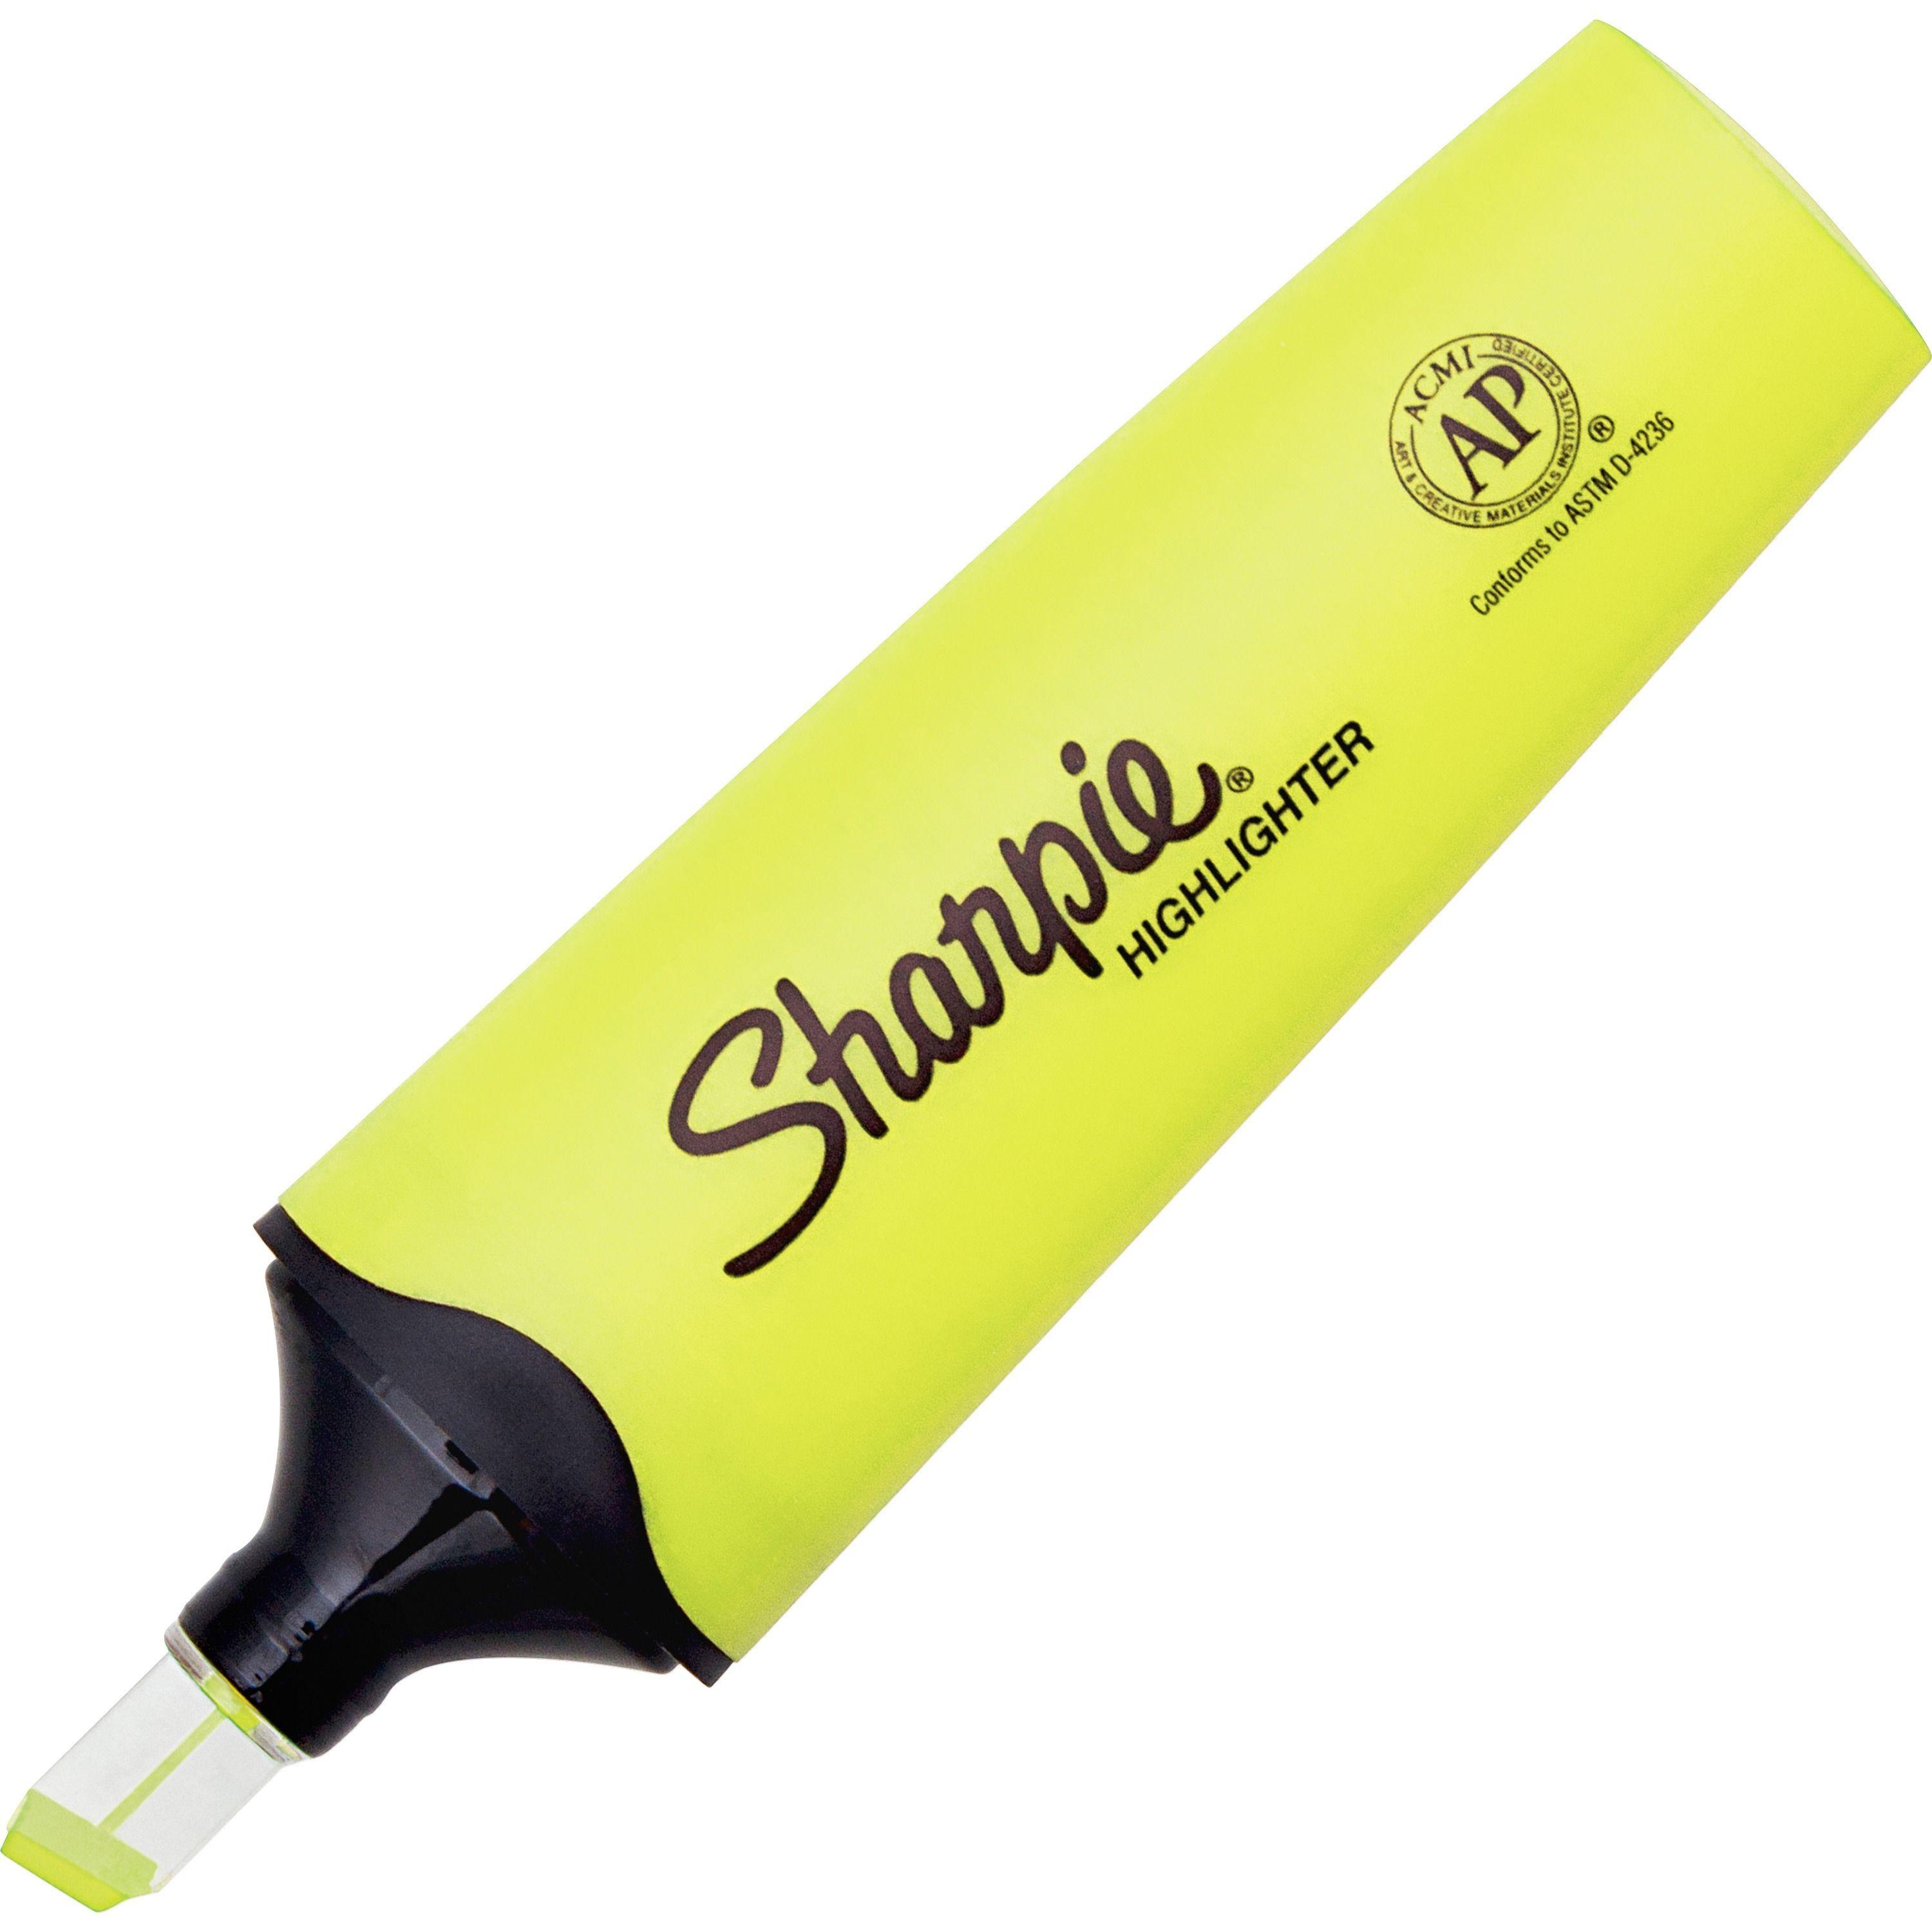 Highliter Yellow Logo - Sharpie Clear View Highlighter - Chisel Marker Point Style ...